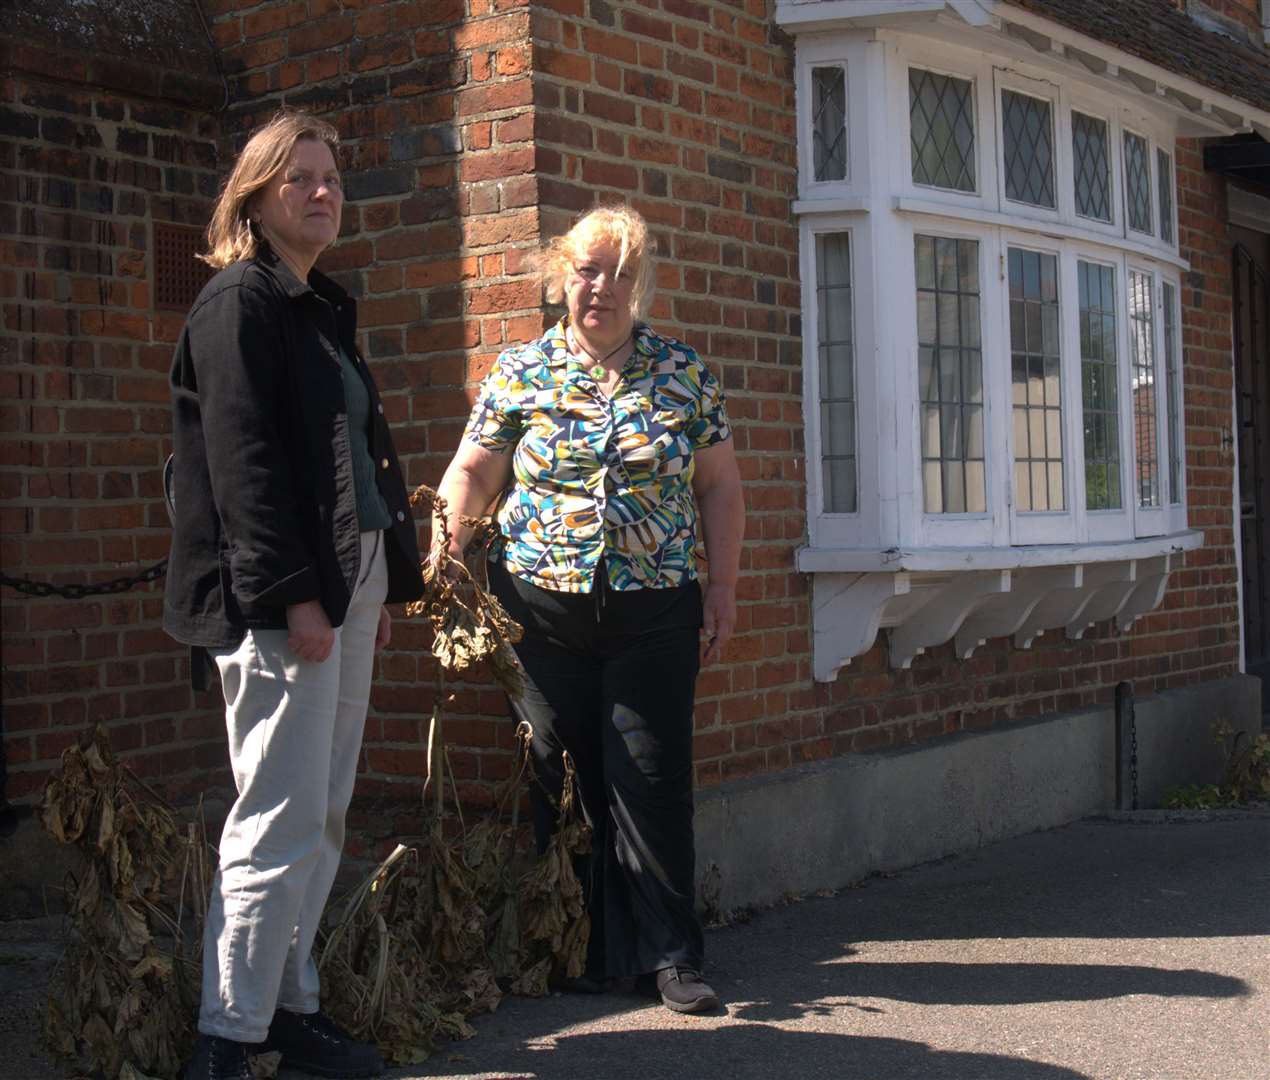 Cllr Clare Turnbull and Susan Mortimer survey the damage to the plants in Whitstable